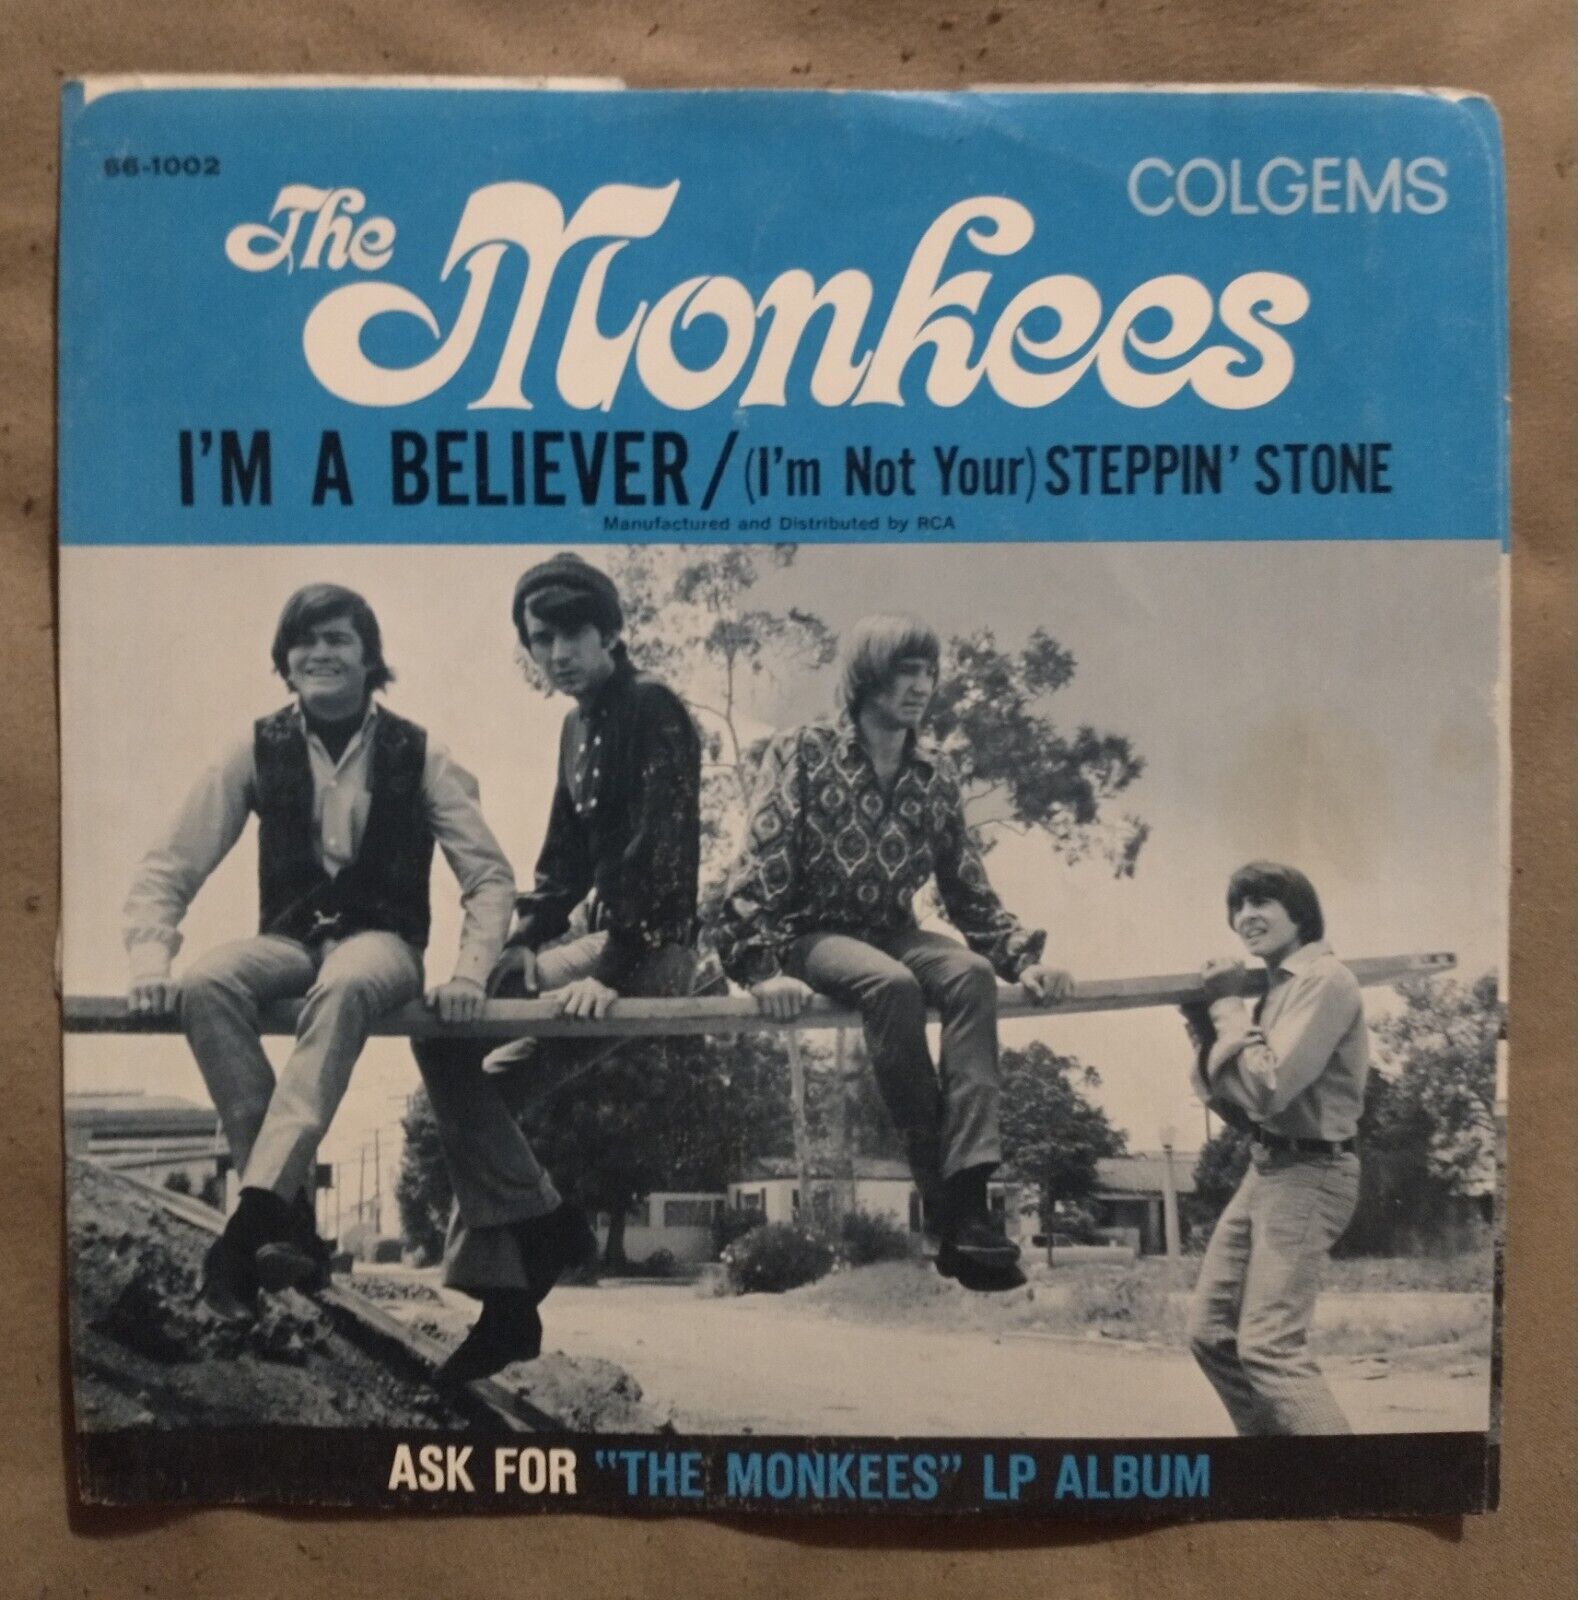 The Monkees "I'm A Believer/Stepping Stone" 45rpm And Sleeve Colgems Records VG+